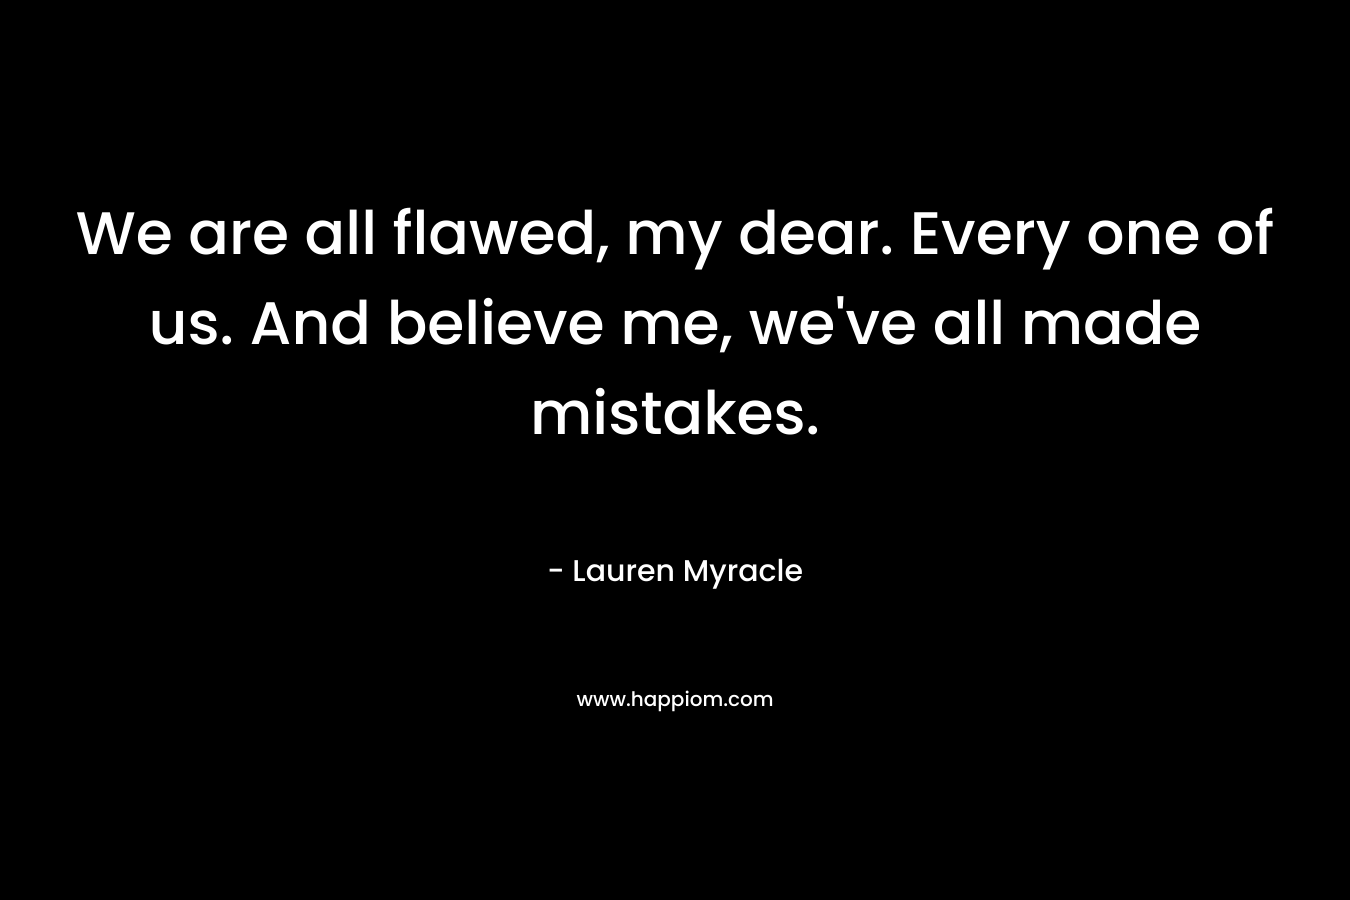 We are all flawed, my dear. Every one of us. And believe me, we've all made mistakes.